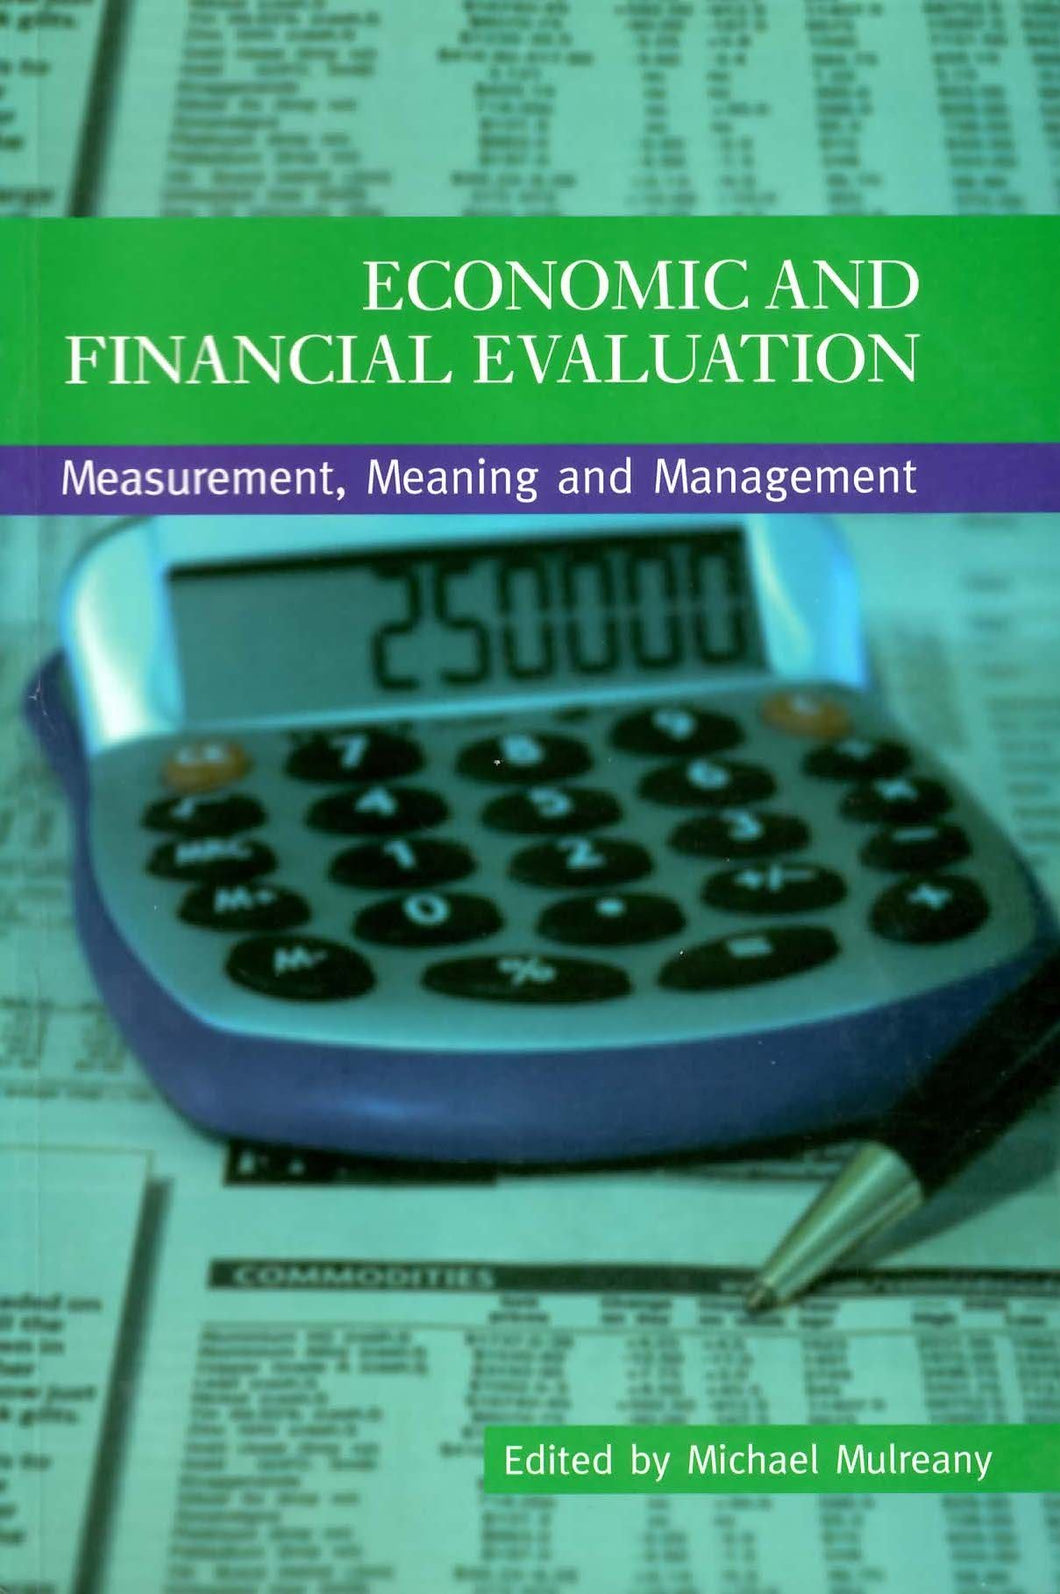 Economic and Financial Evaluation: Measurement, Meaning and Management